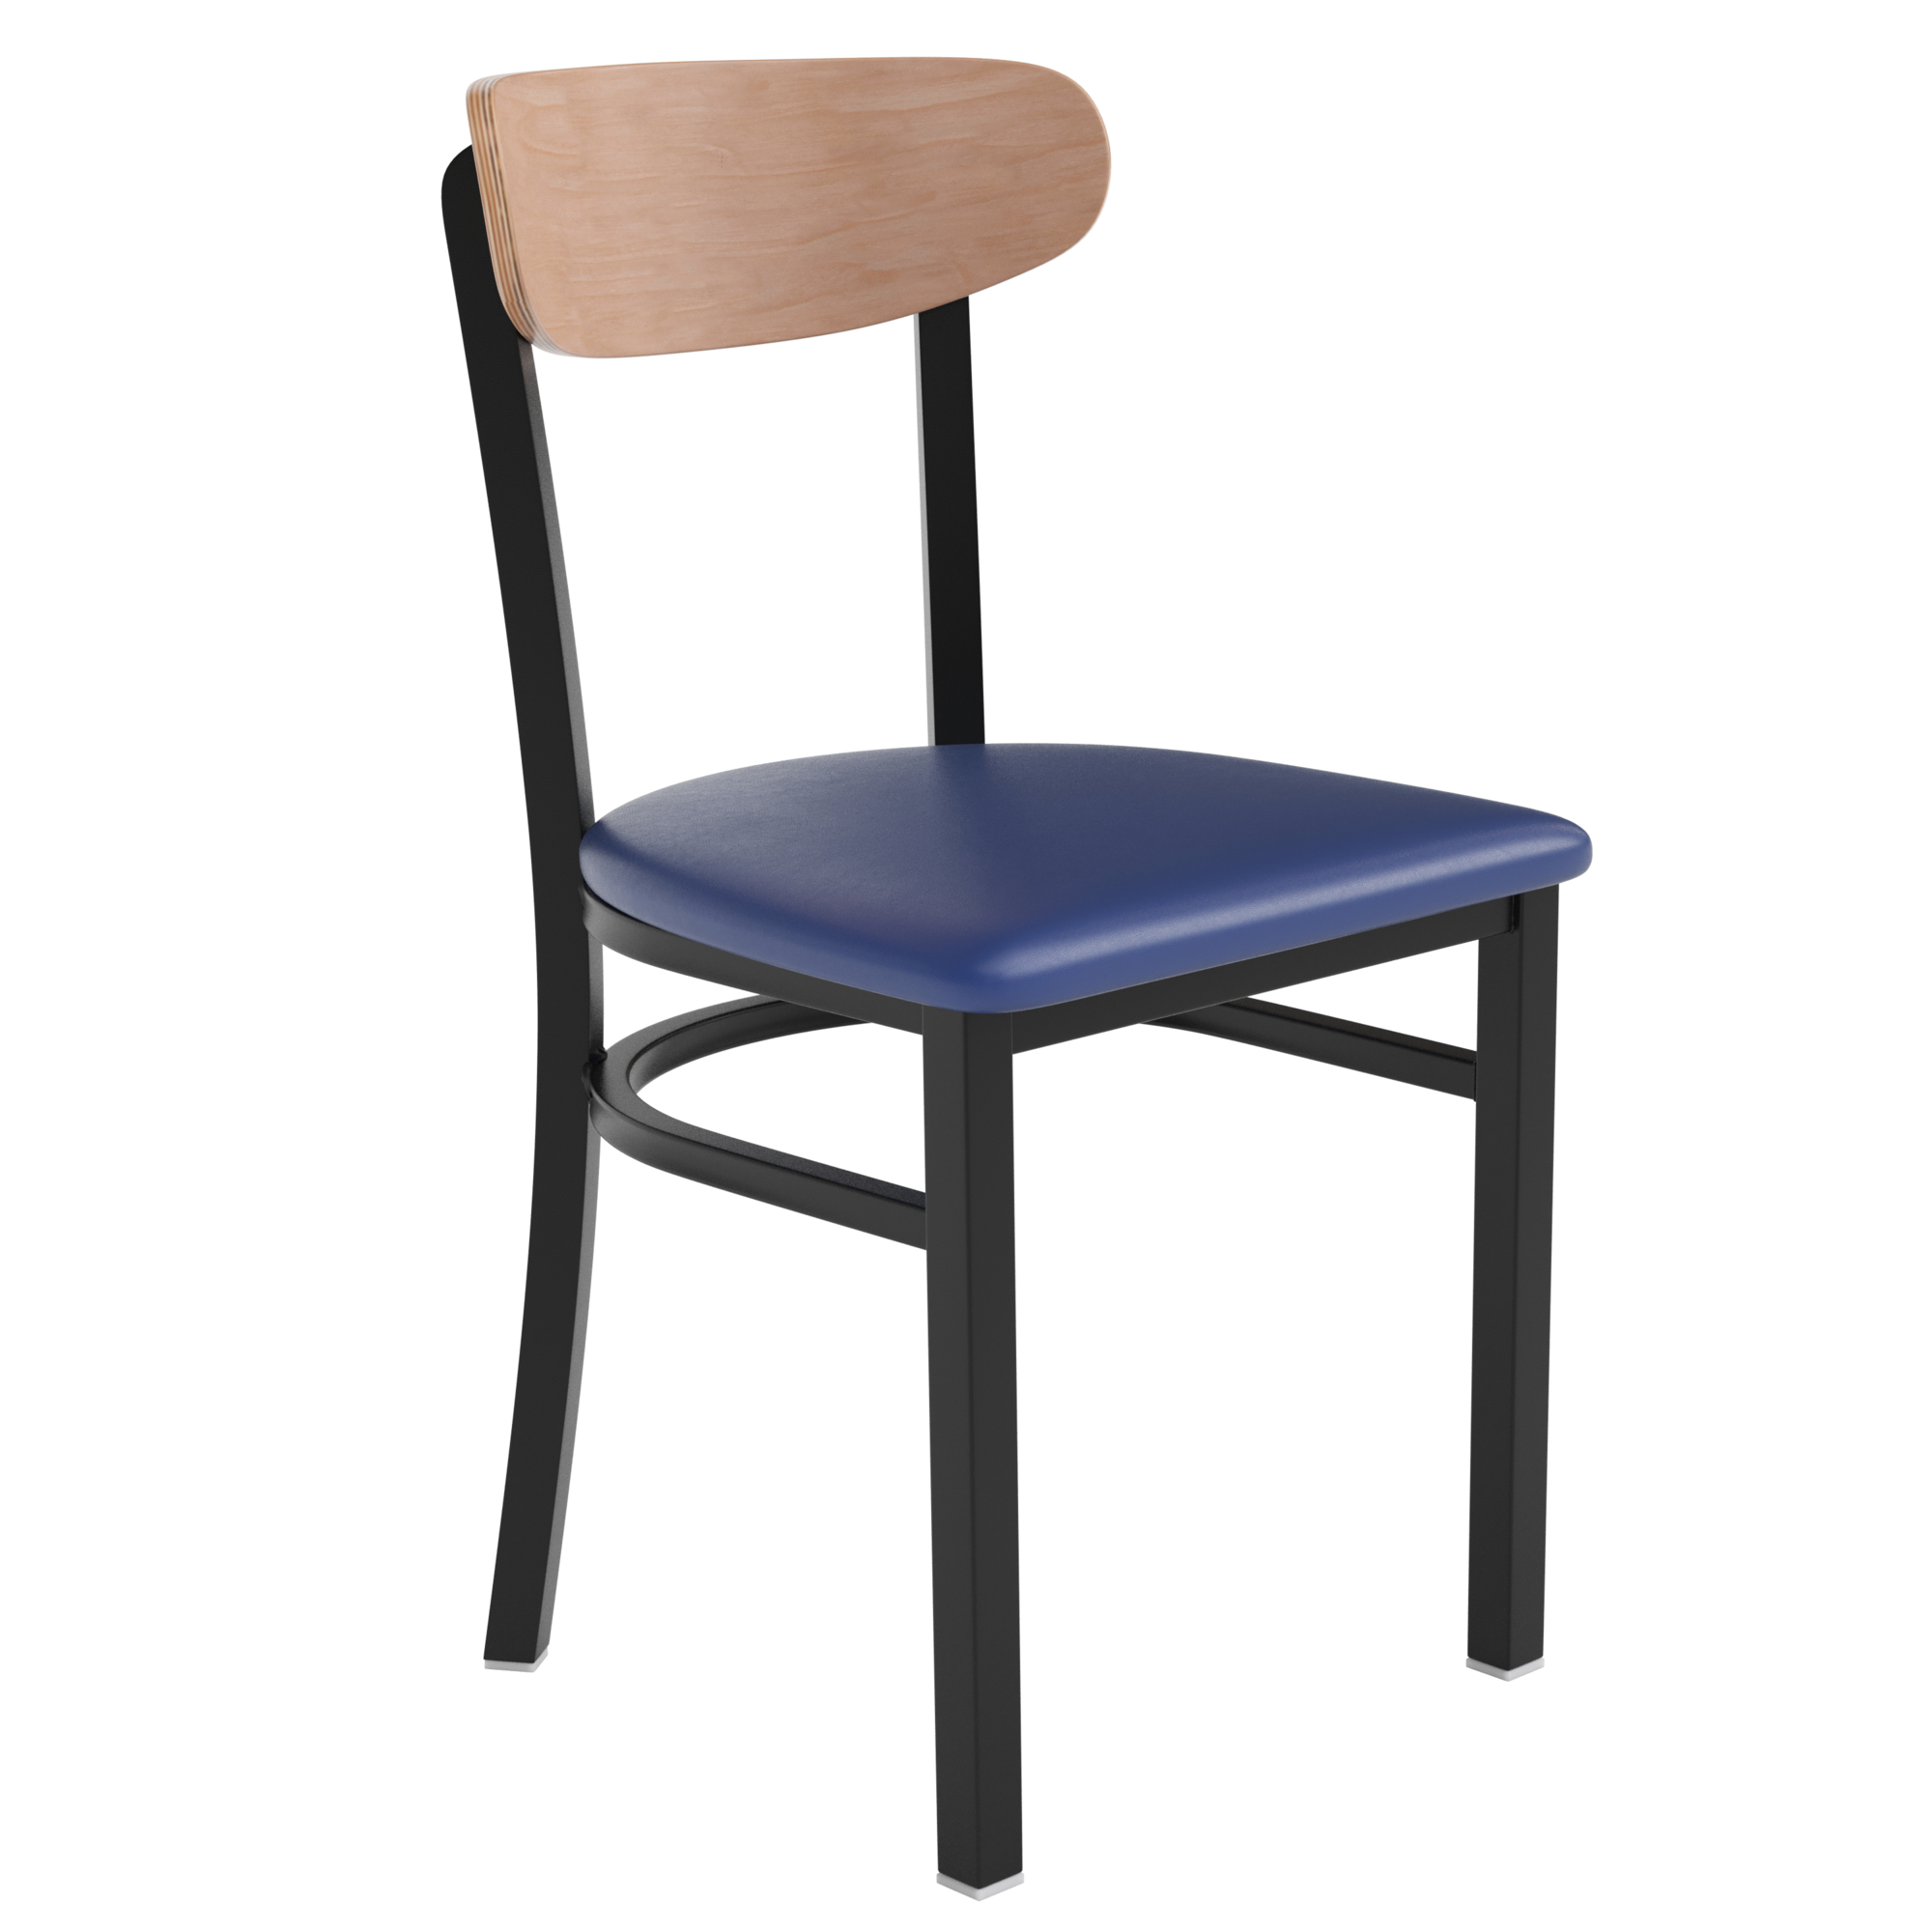 Flash Furniture, Blue Vinyl Seat Dining Chair - Natural Wood Back, Primary Color Blue, Included (qty.) 1, Model XUDG6V5BLVNAT